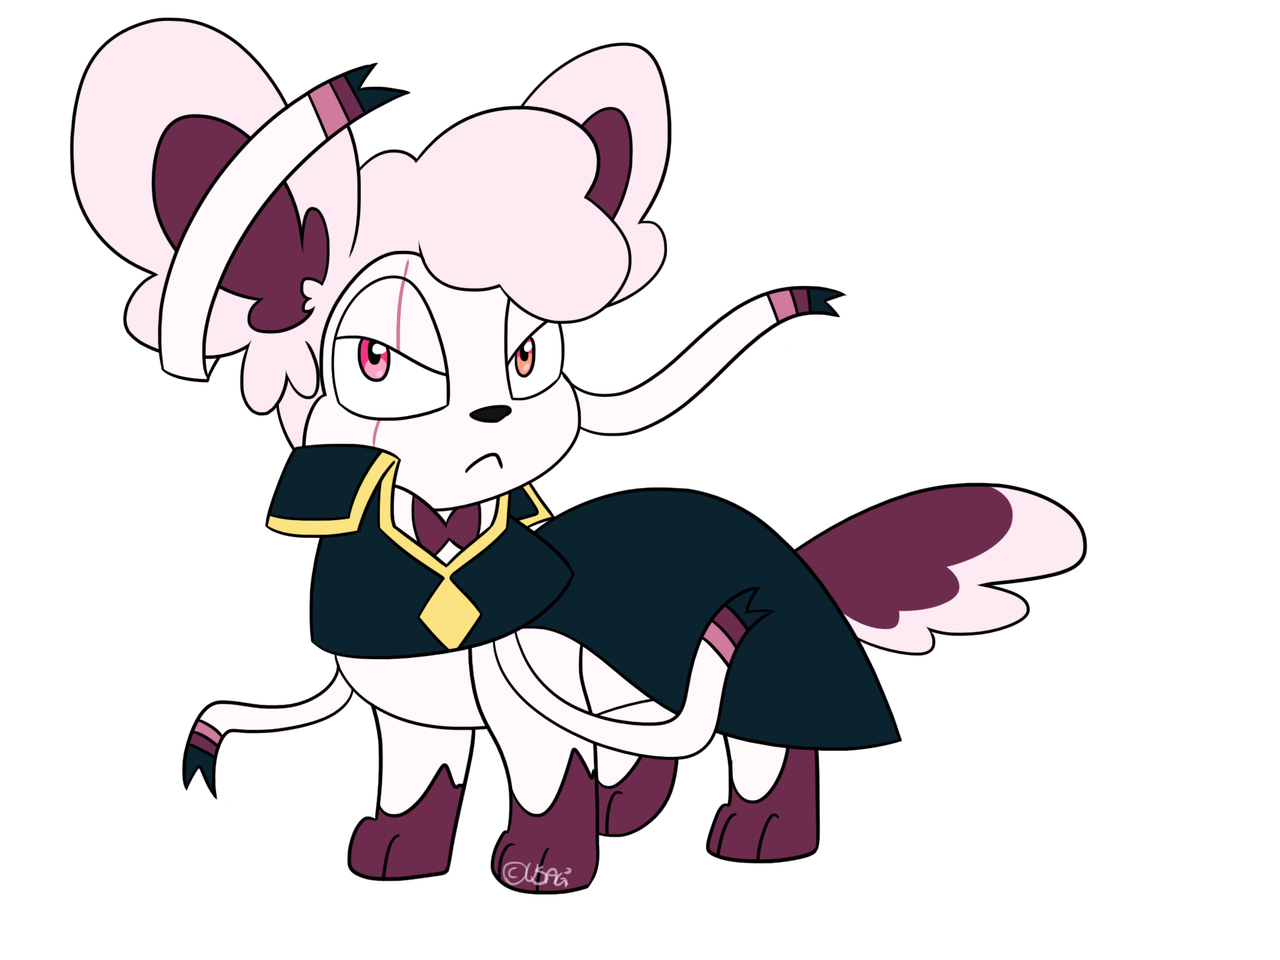 Explanations should not be necessary at this point. Its just Lars. As a Sylveon. The best fairy. Reblog, don’t repost.